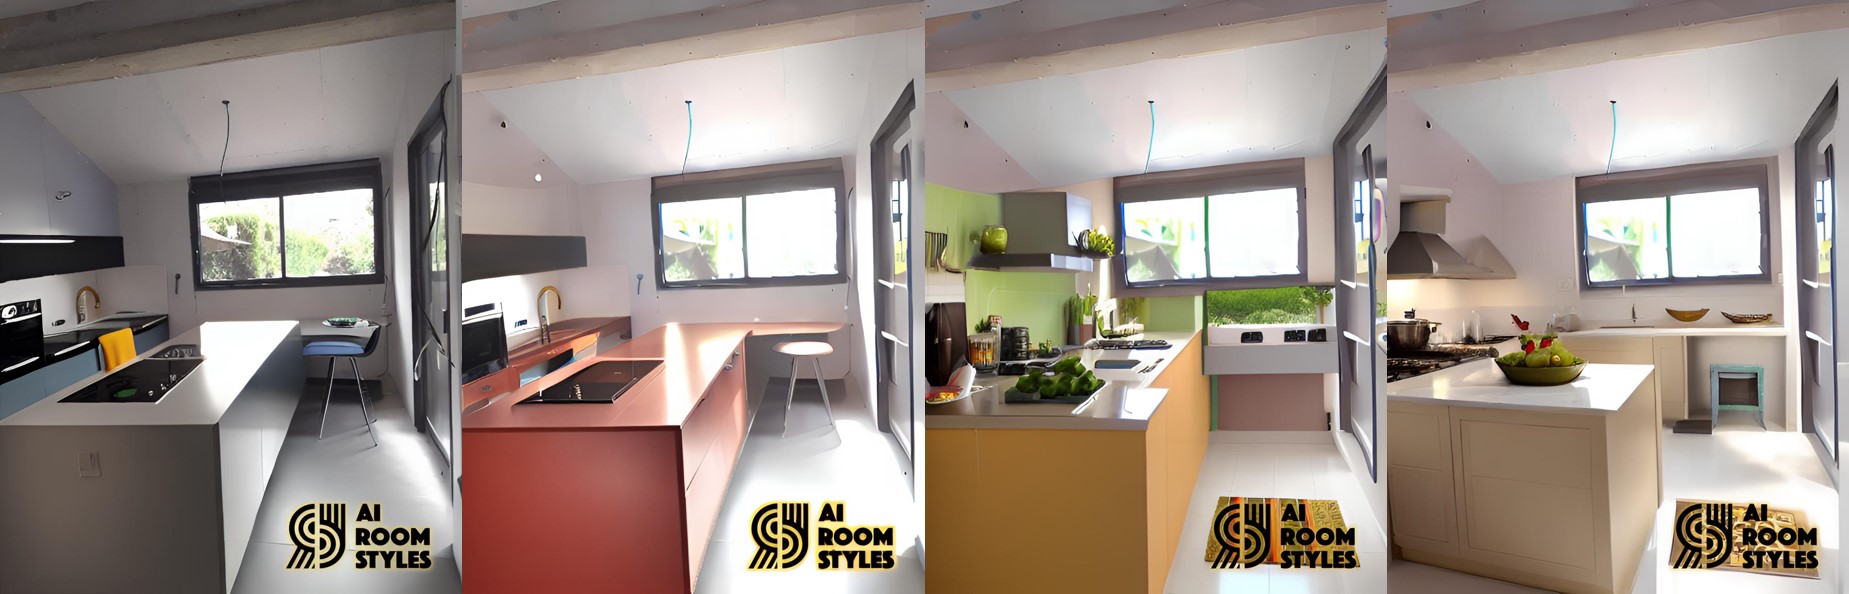 Possible renderings to renovate a kitchen